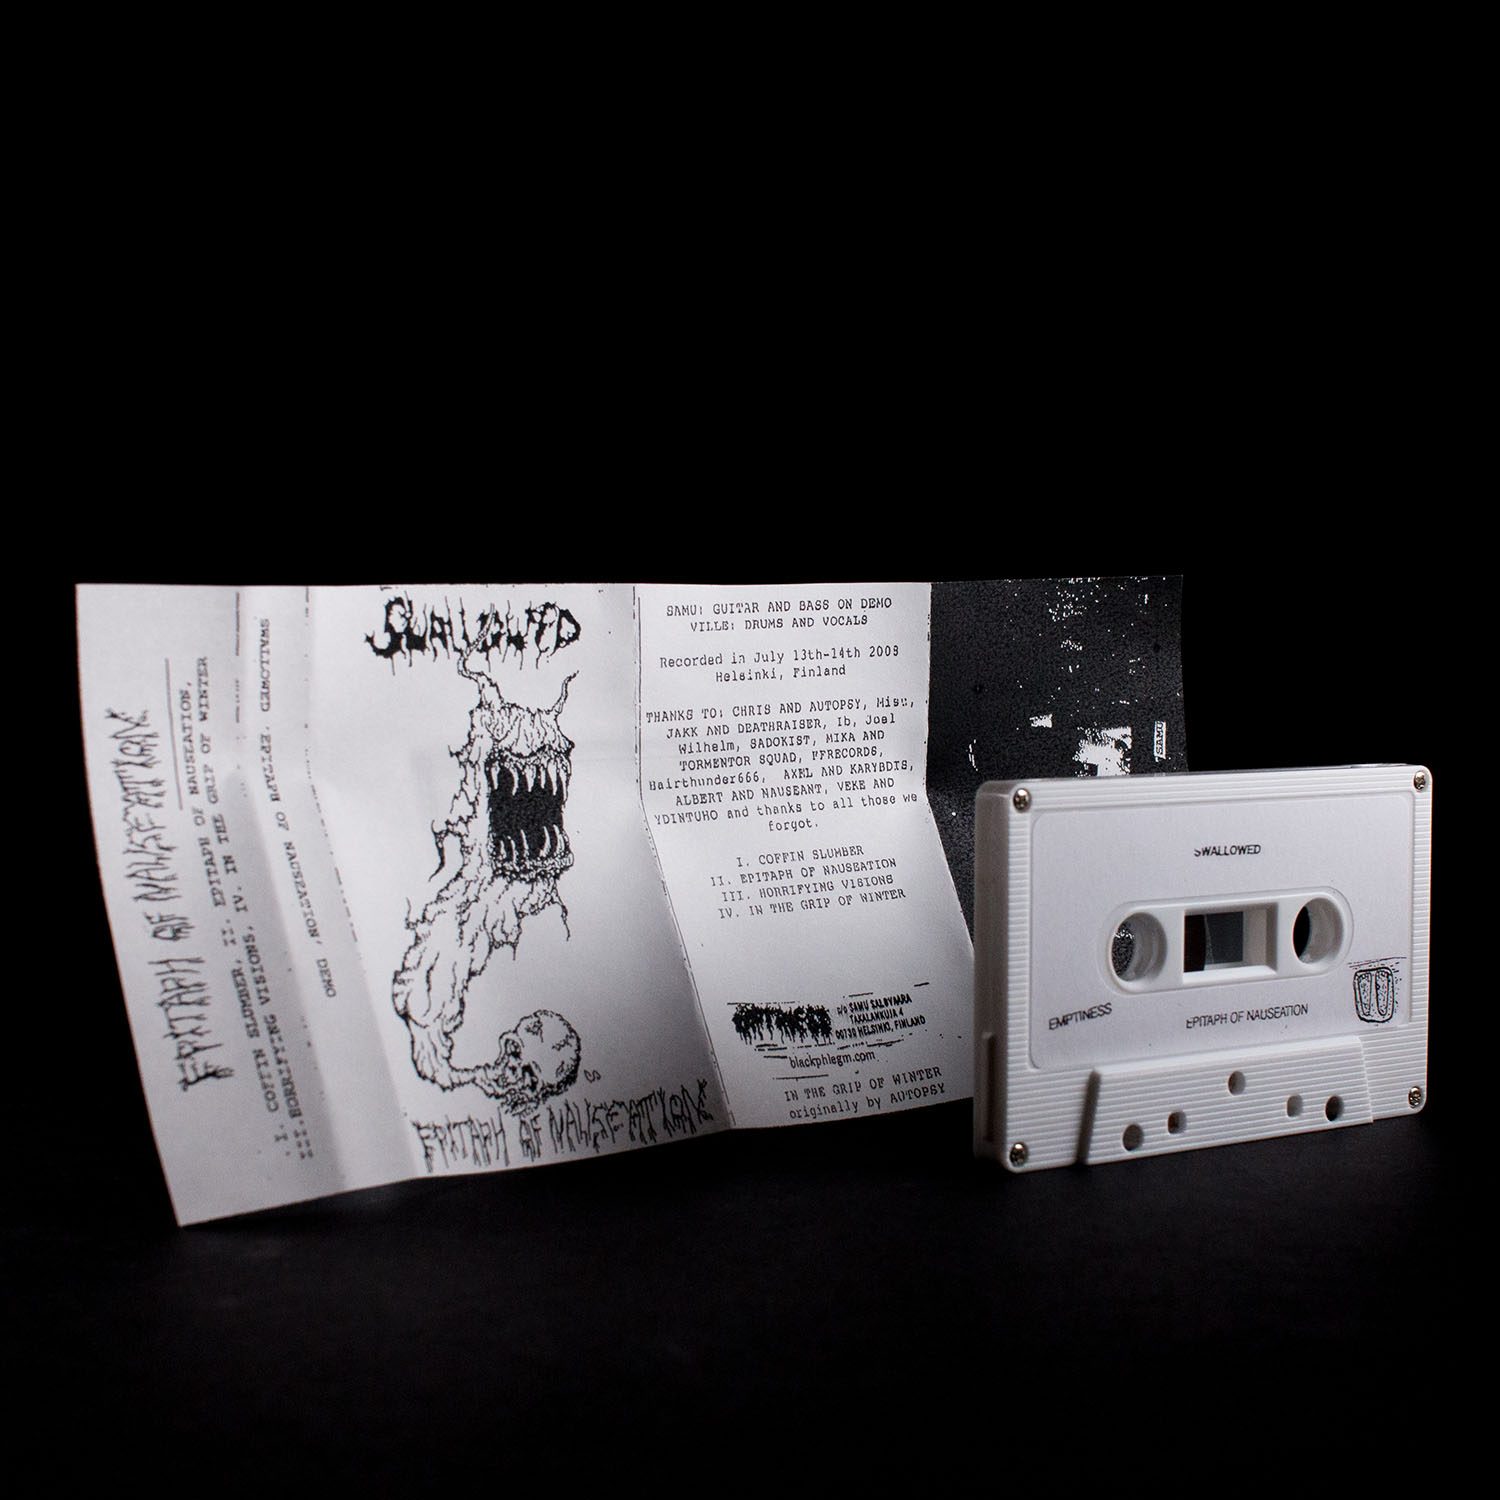 Swallowed \"Epitaph Of Nauseation\" Cassette